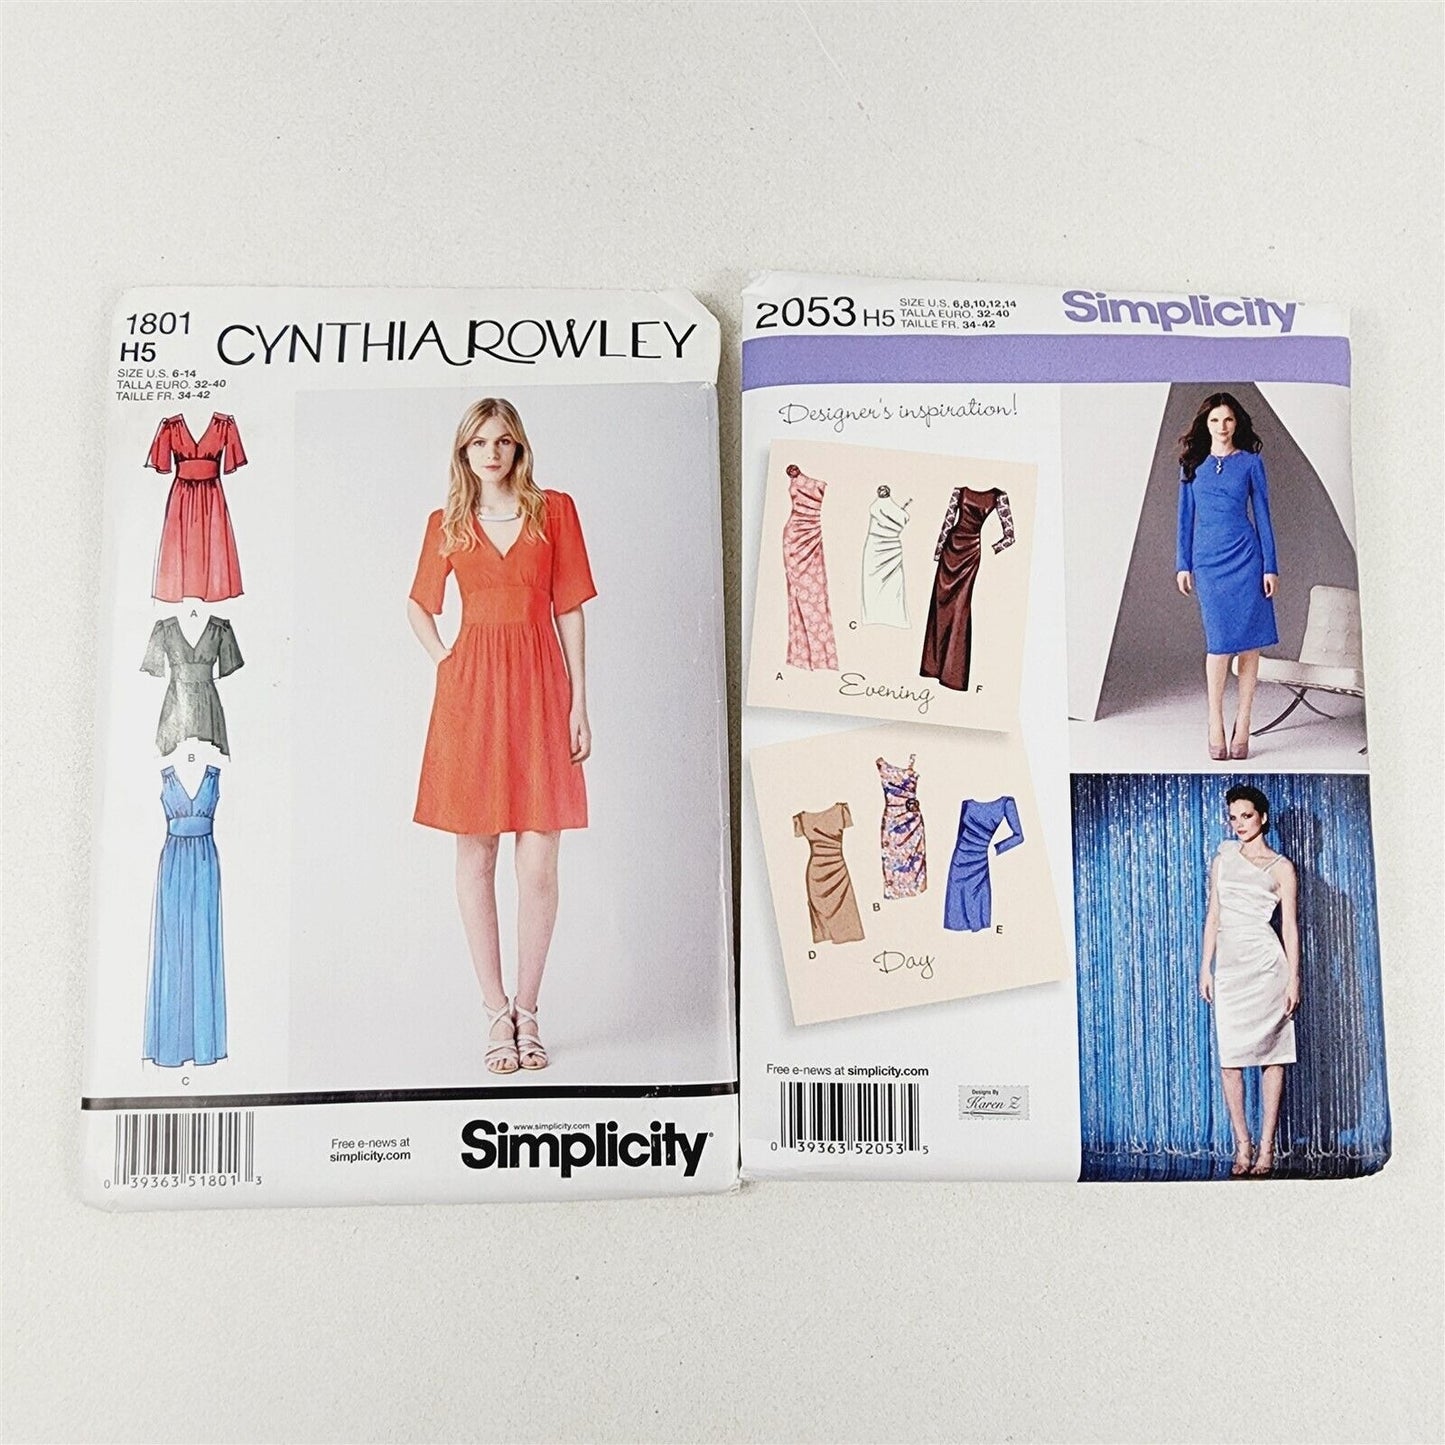 9 Sewing Pattern Lot Simplicity Butterick Dresses Jackets Various Sizes